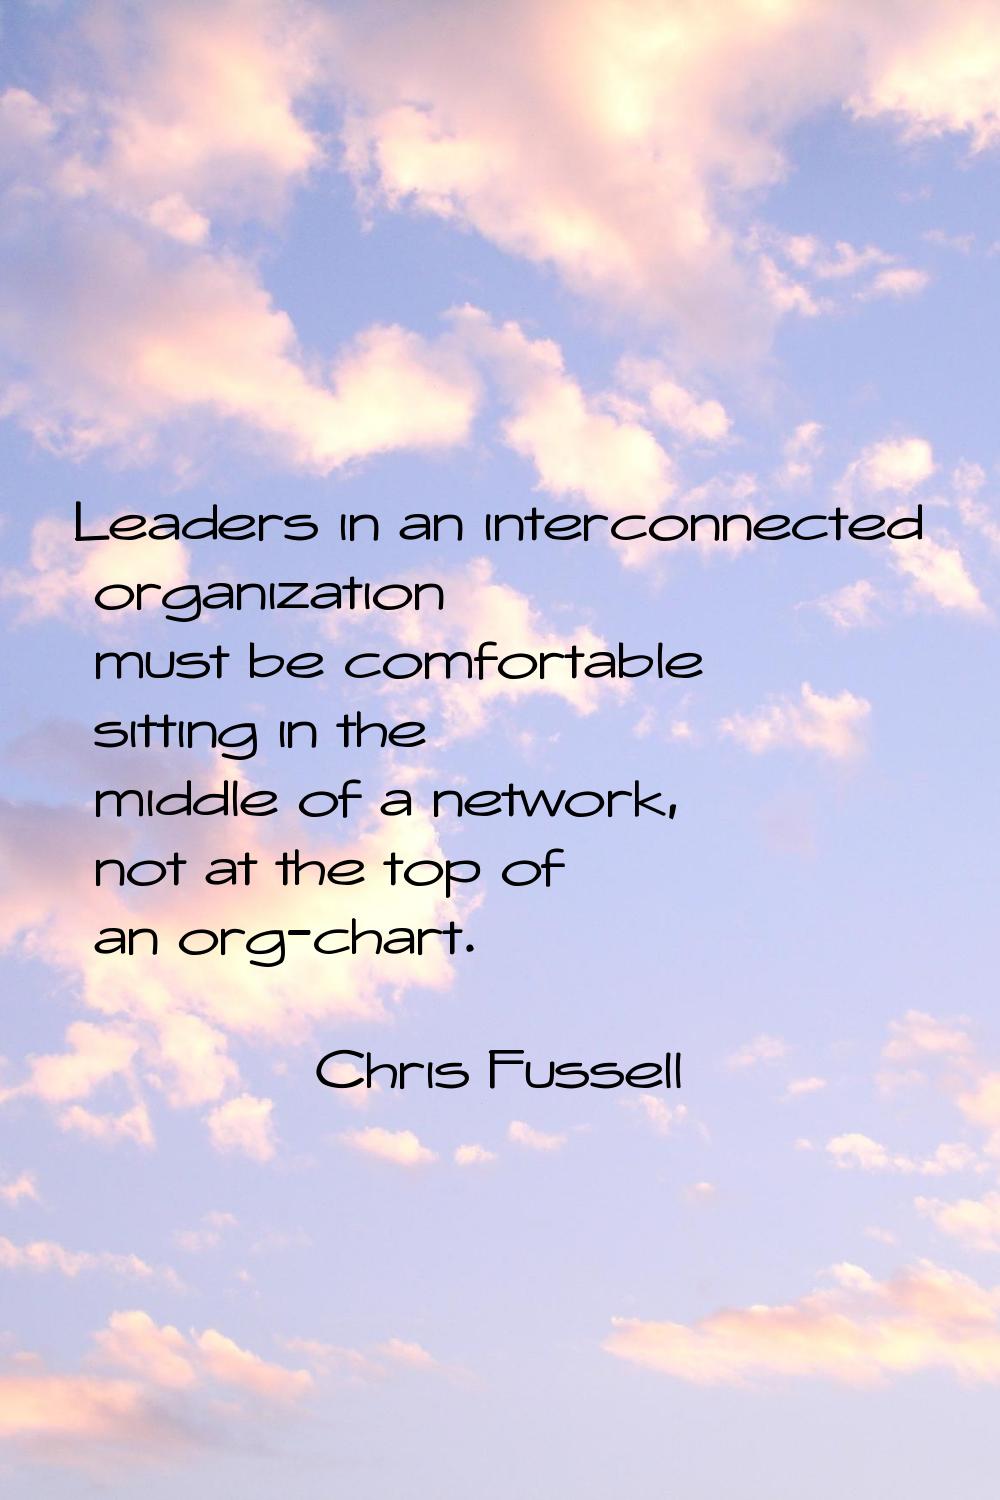 Leaders in an interconnected organization must be comfortable sitting in the middle of a network, n